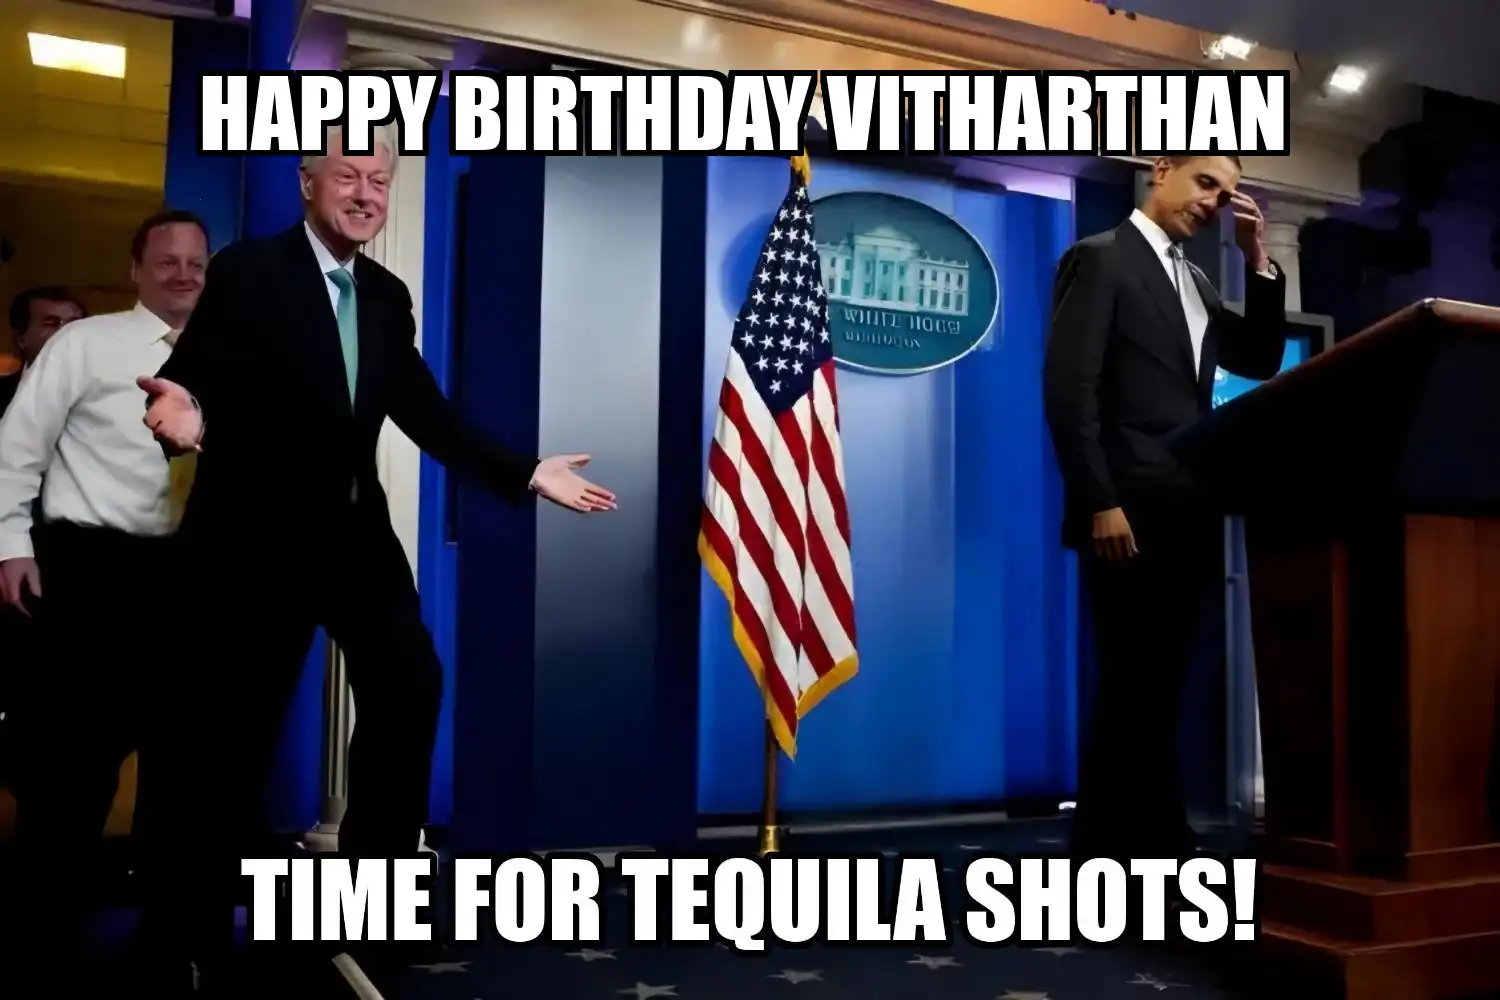 Happy Birthday Vitharthan Time For Tequila Shots Memes